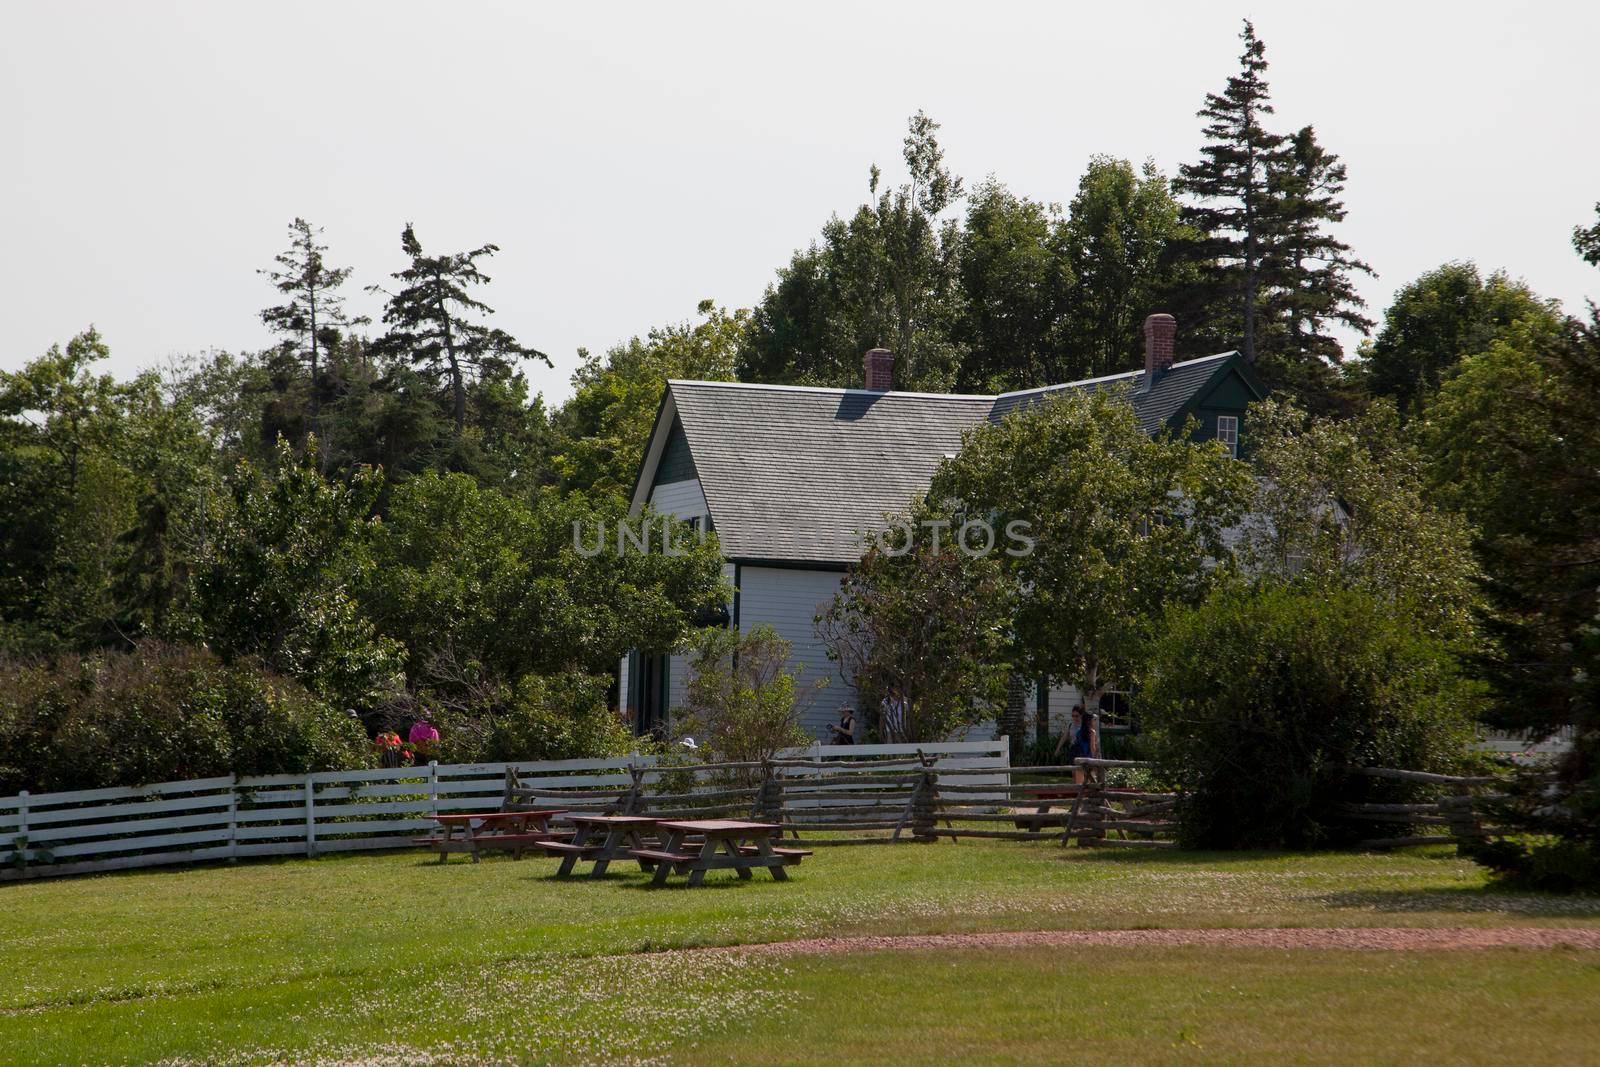 July 27, 2019- Cavendish, PEI: Tourists walking in front of the famed Green Gables House 